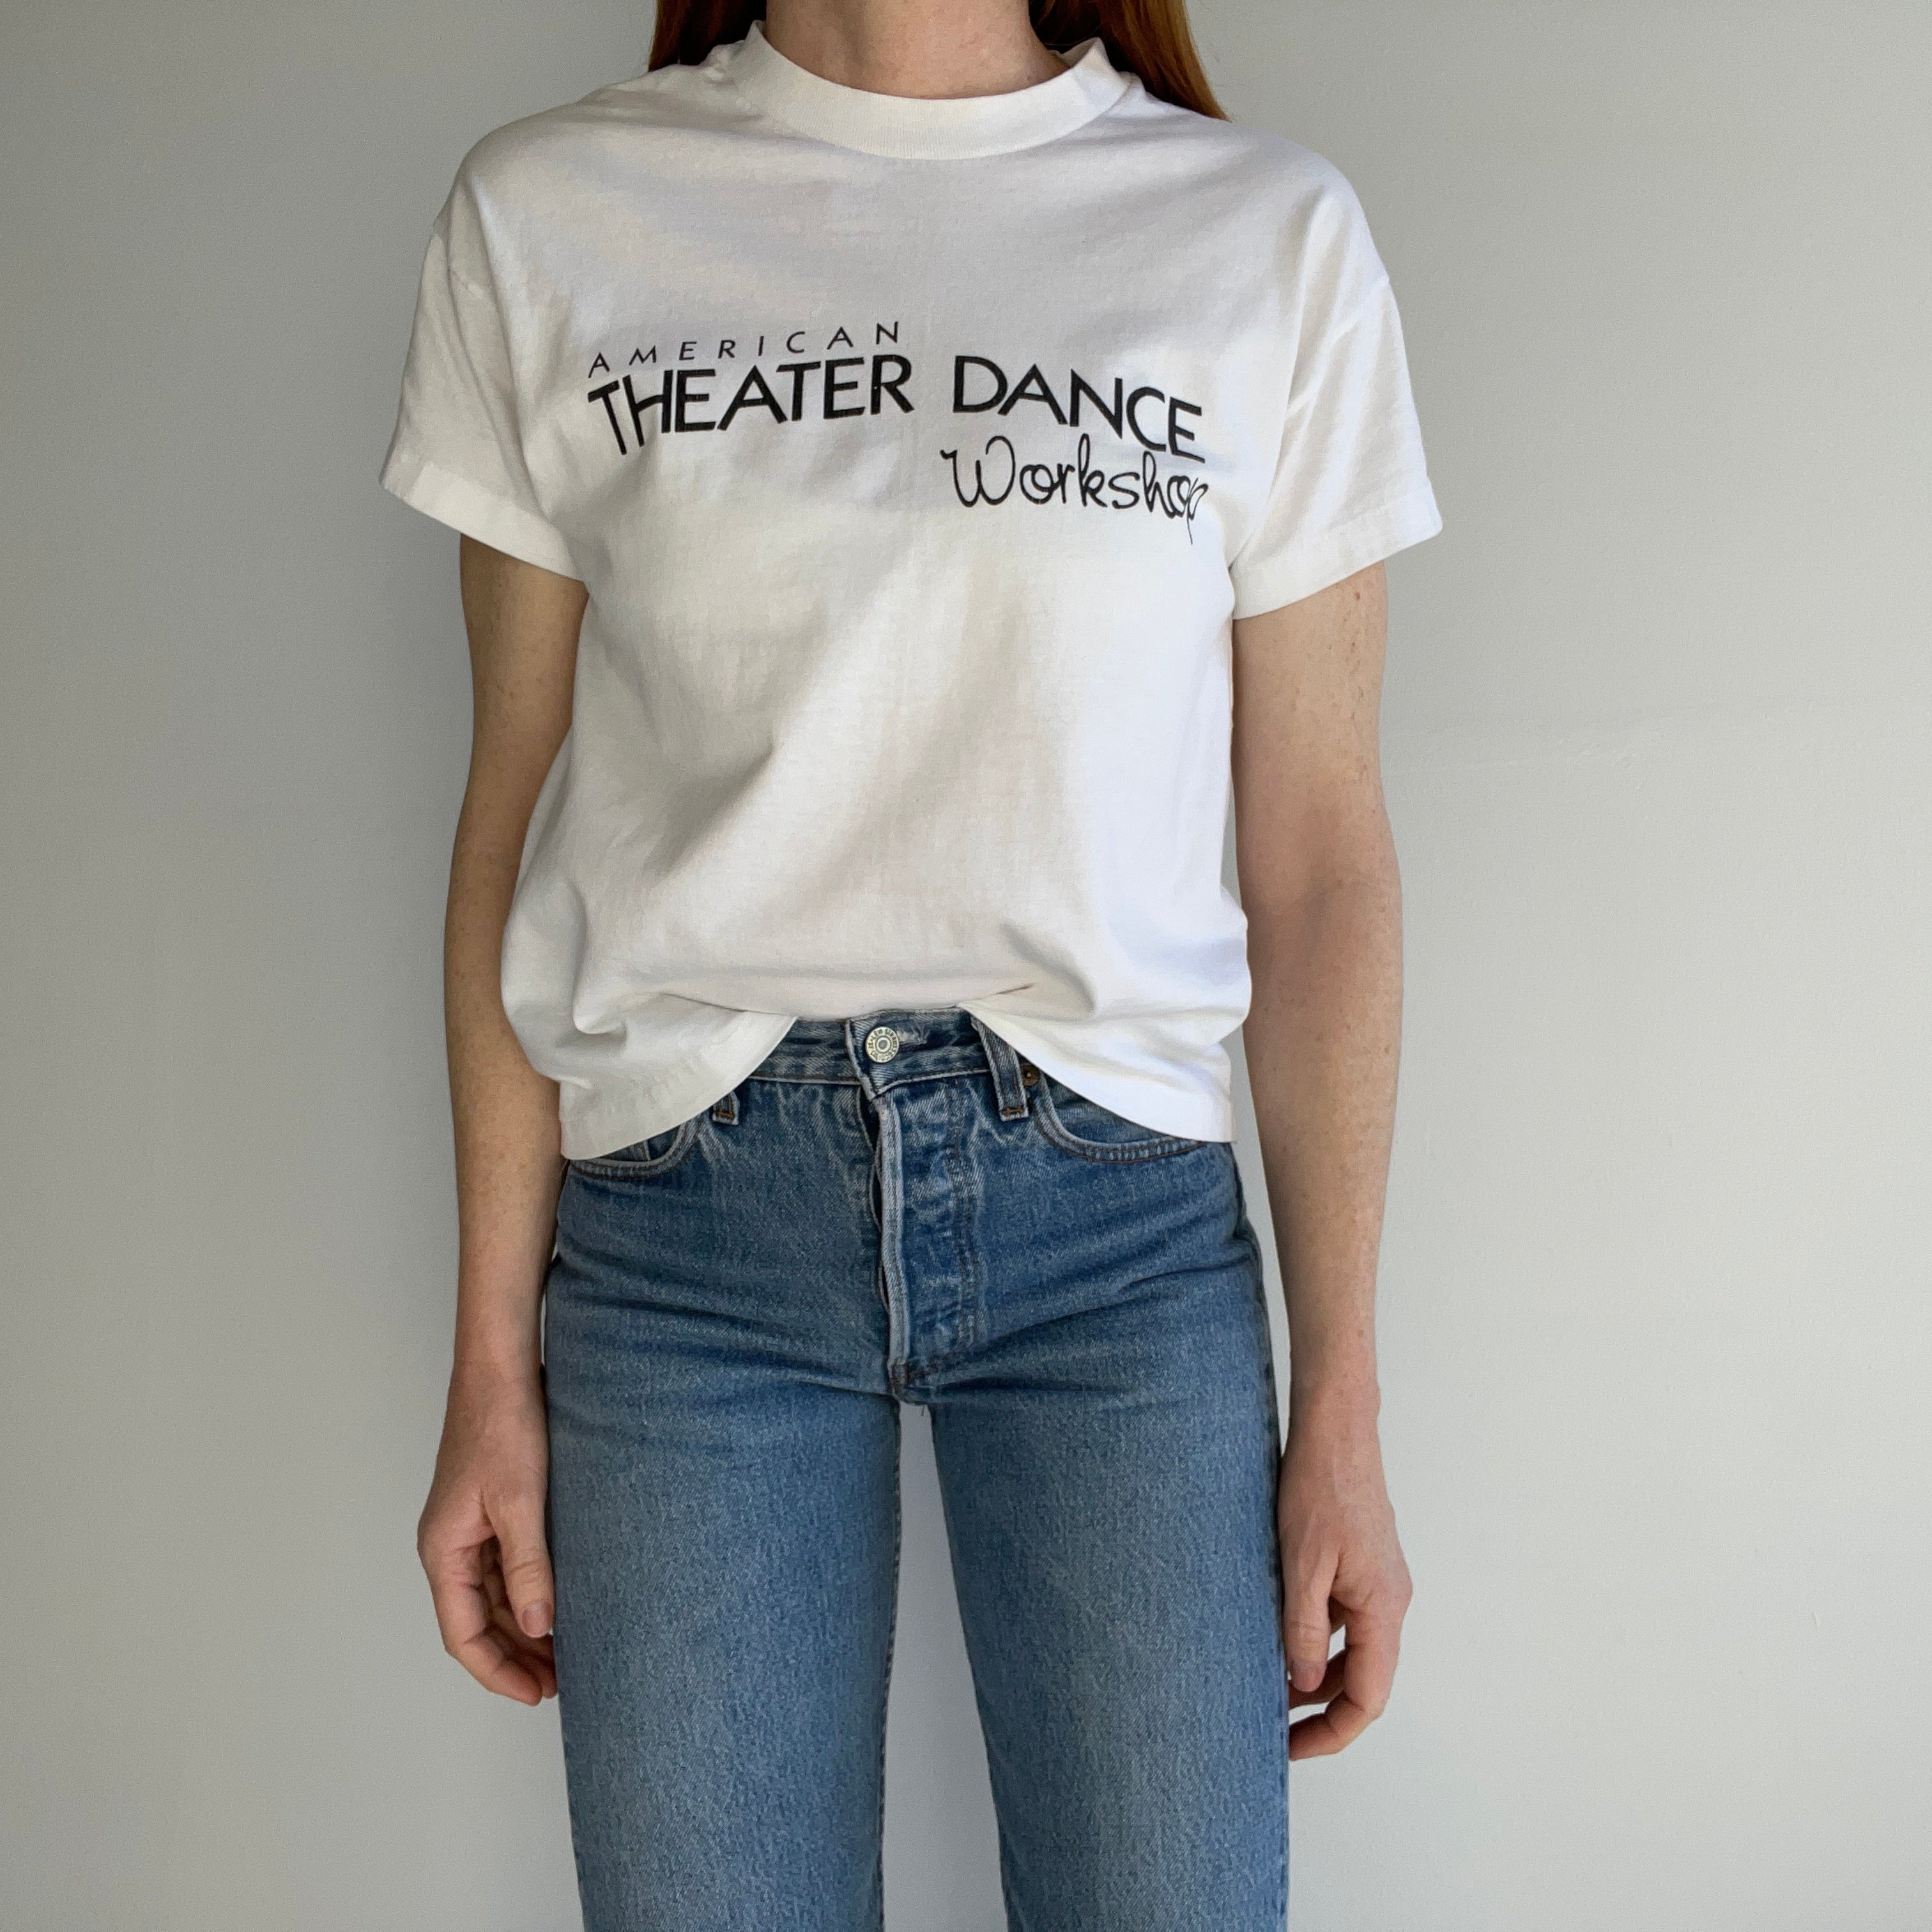 1990s American Theater Dance Workshop Front and Back DIY 